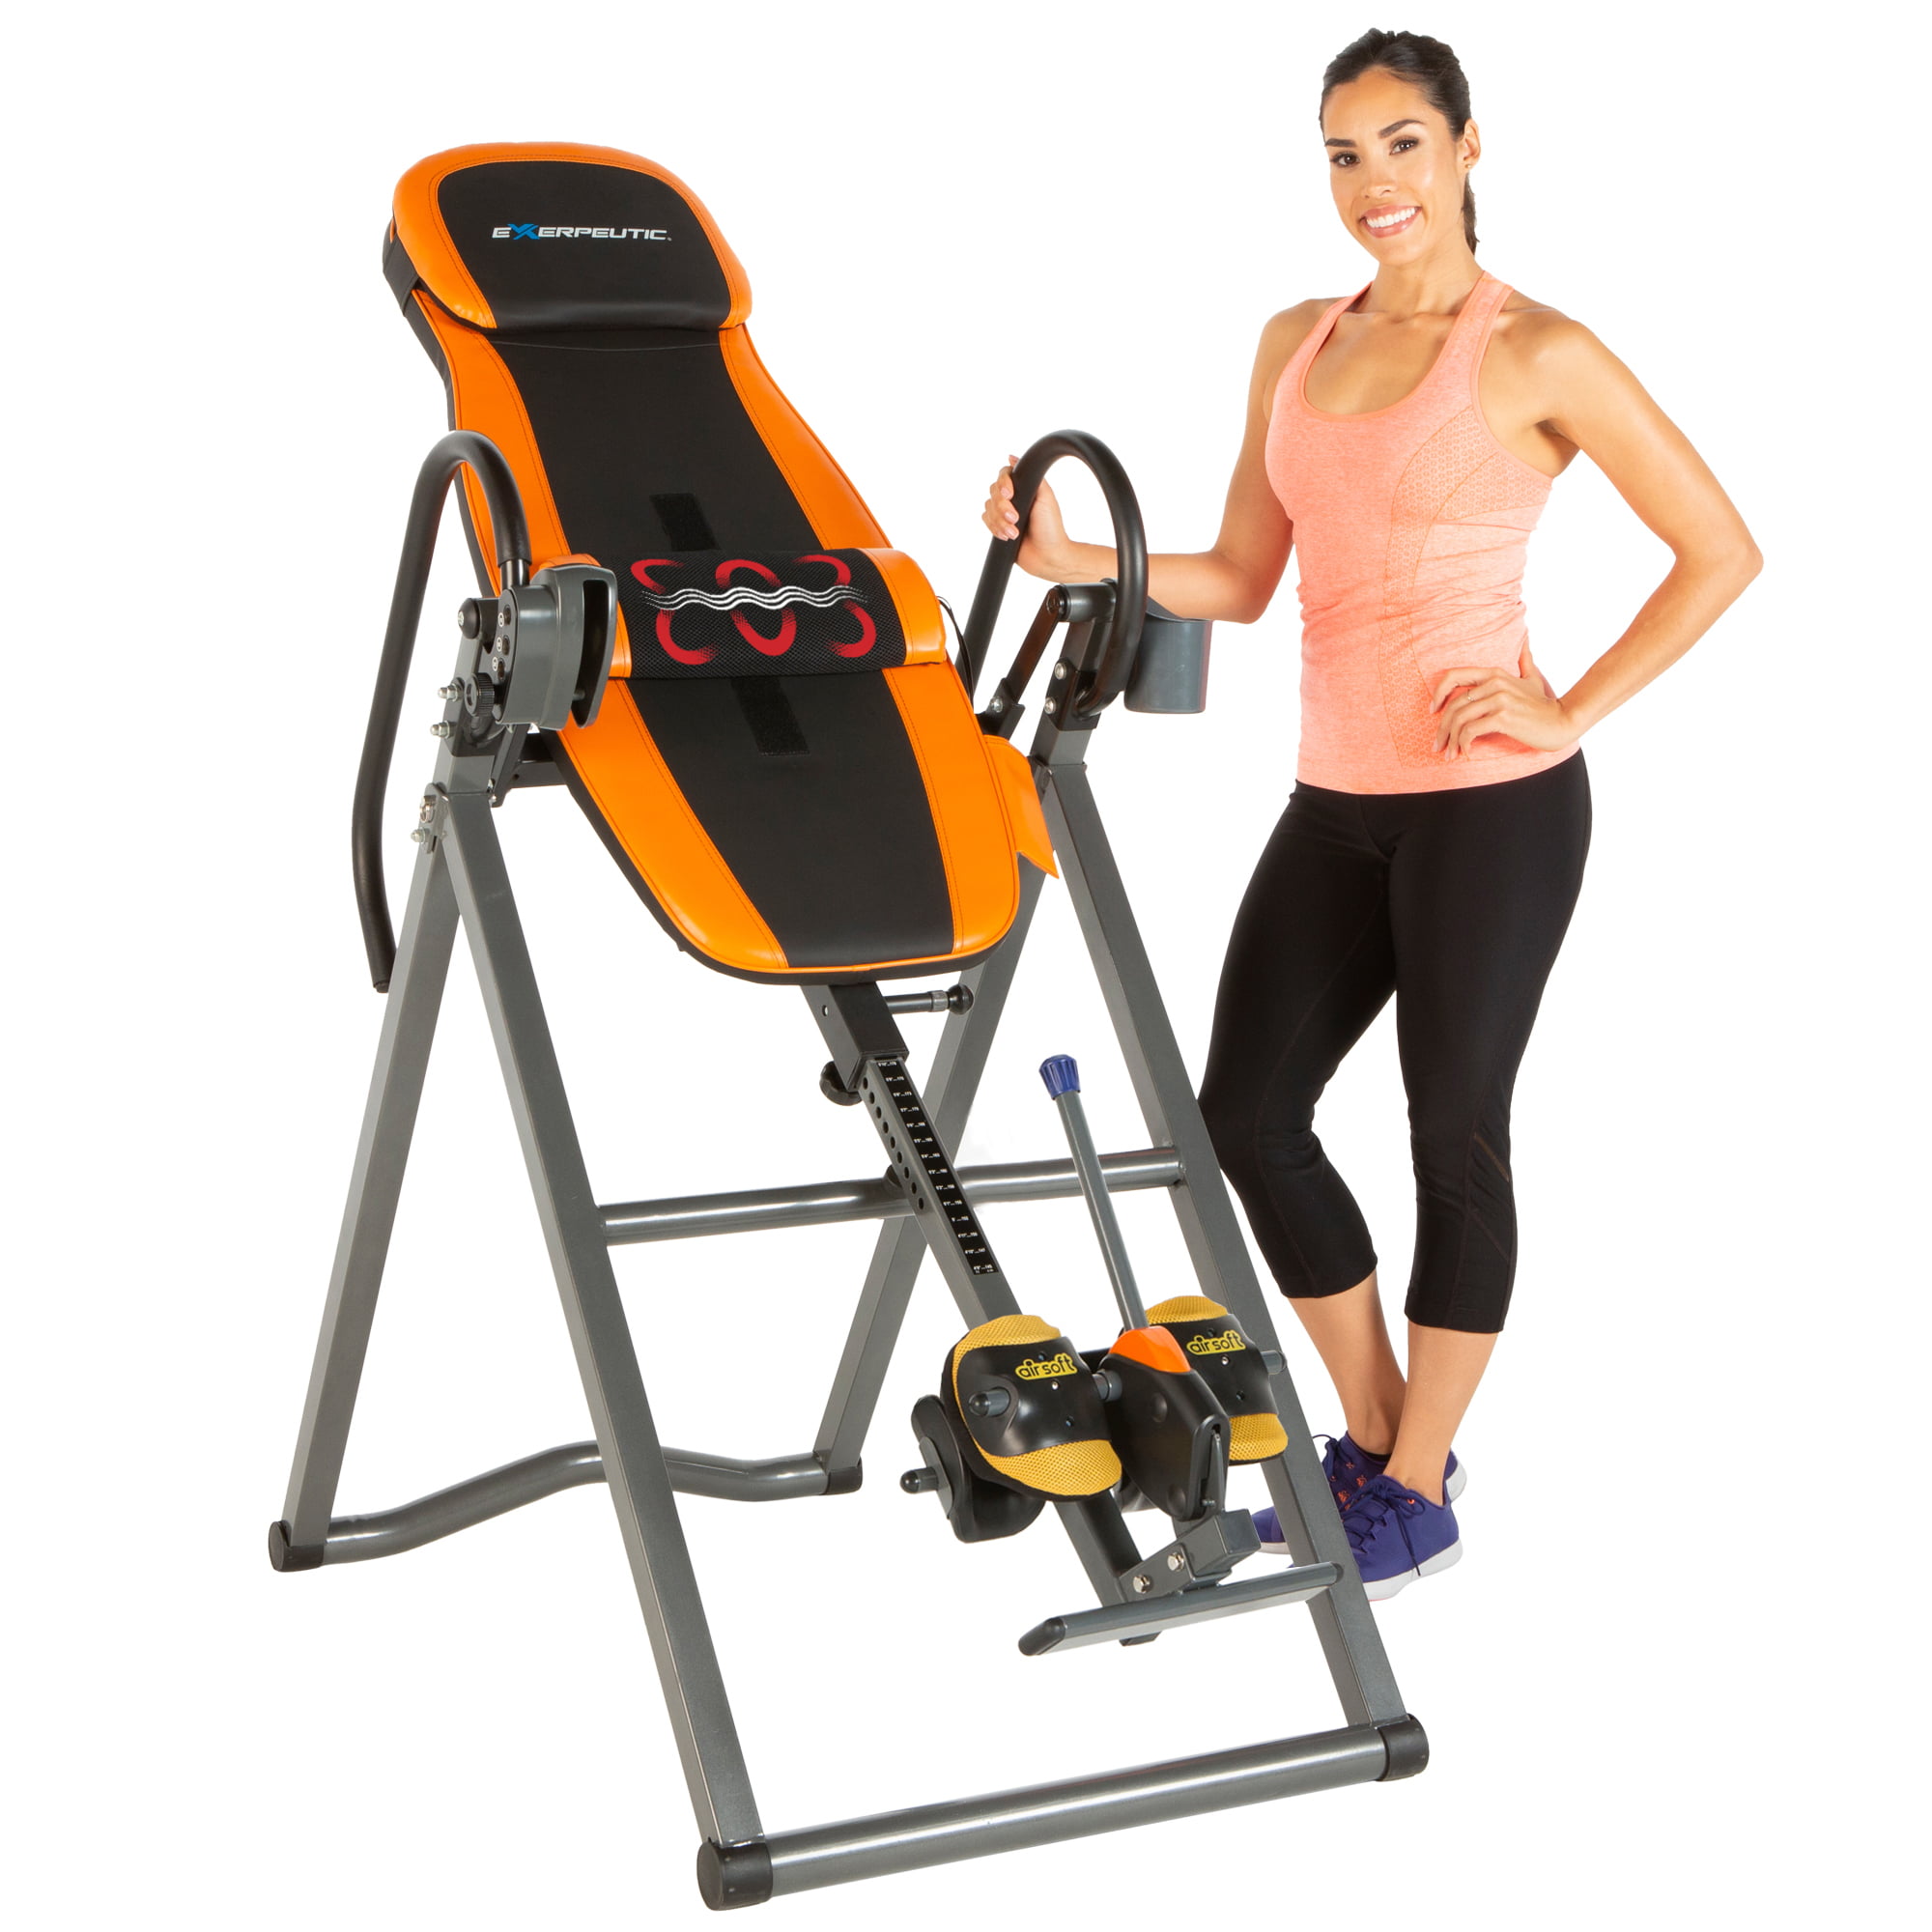 Details about   Heavy Duty Inversion Table Back Pain Relief Therapy Fitness Exercise Adjustable 